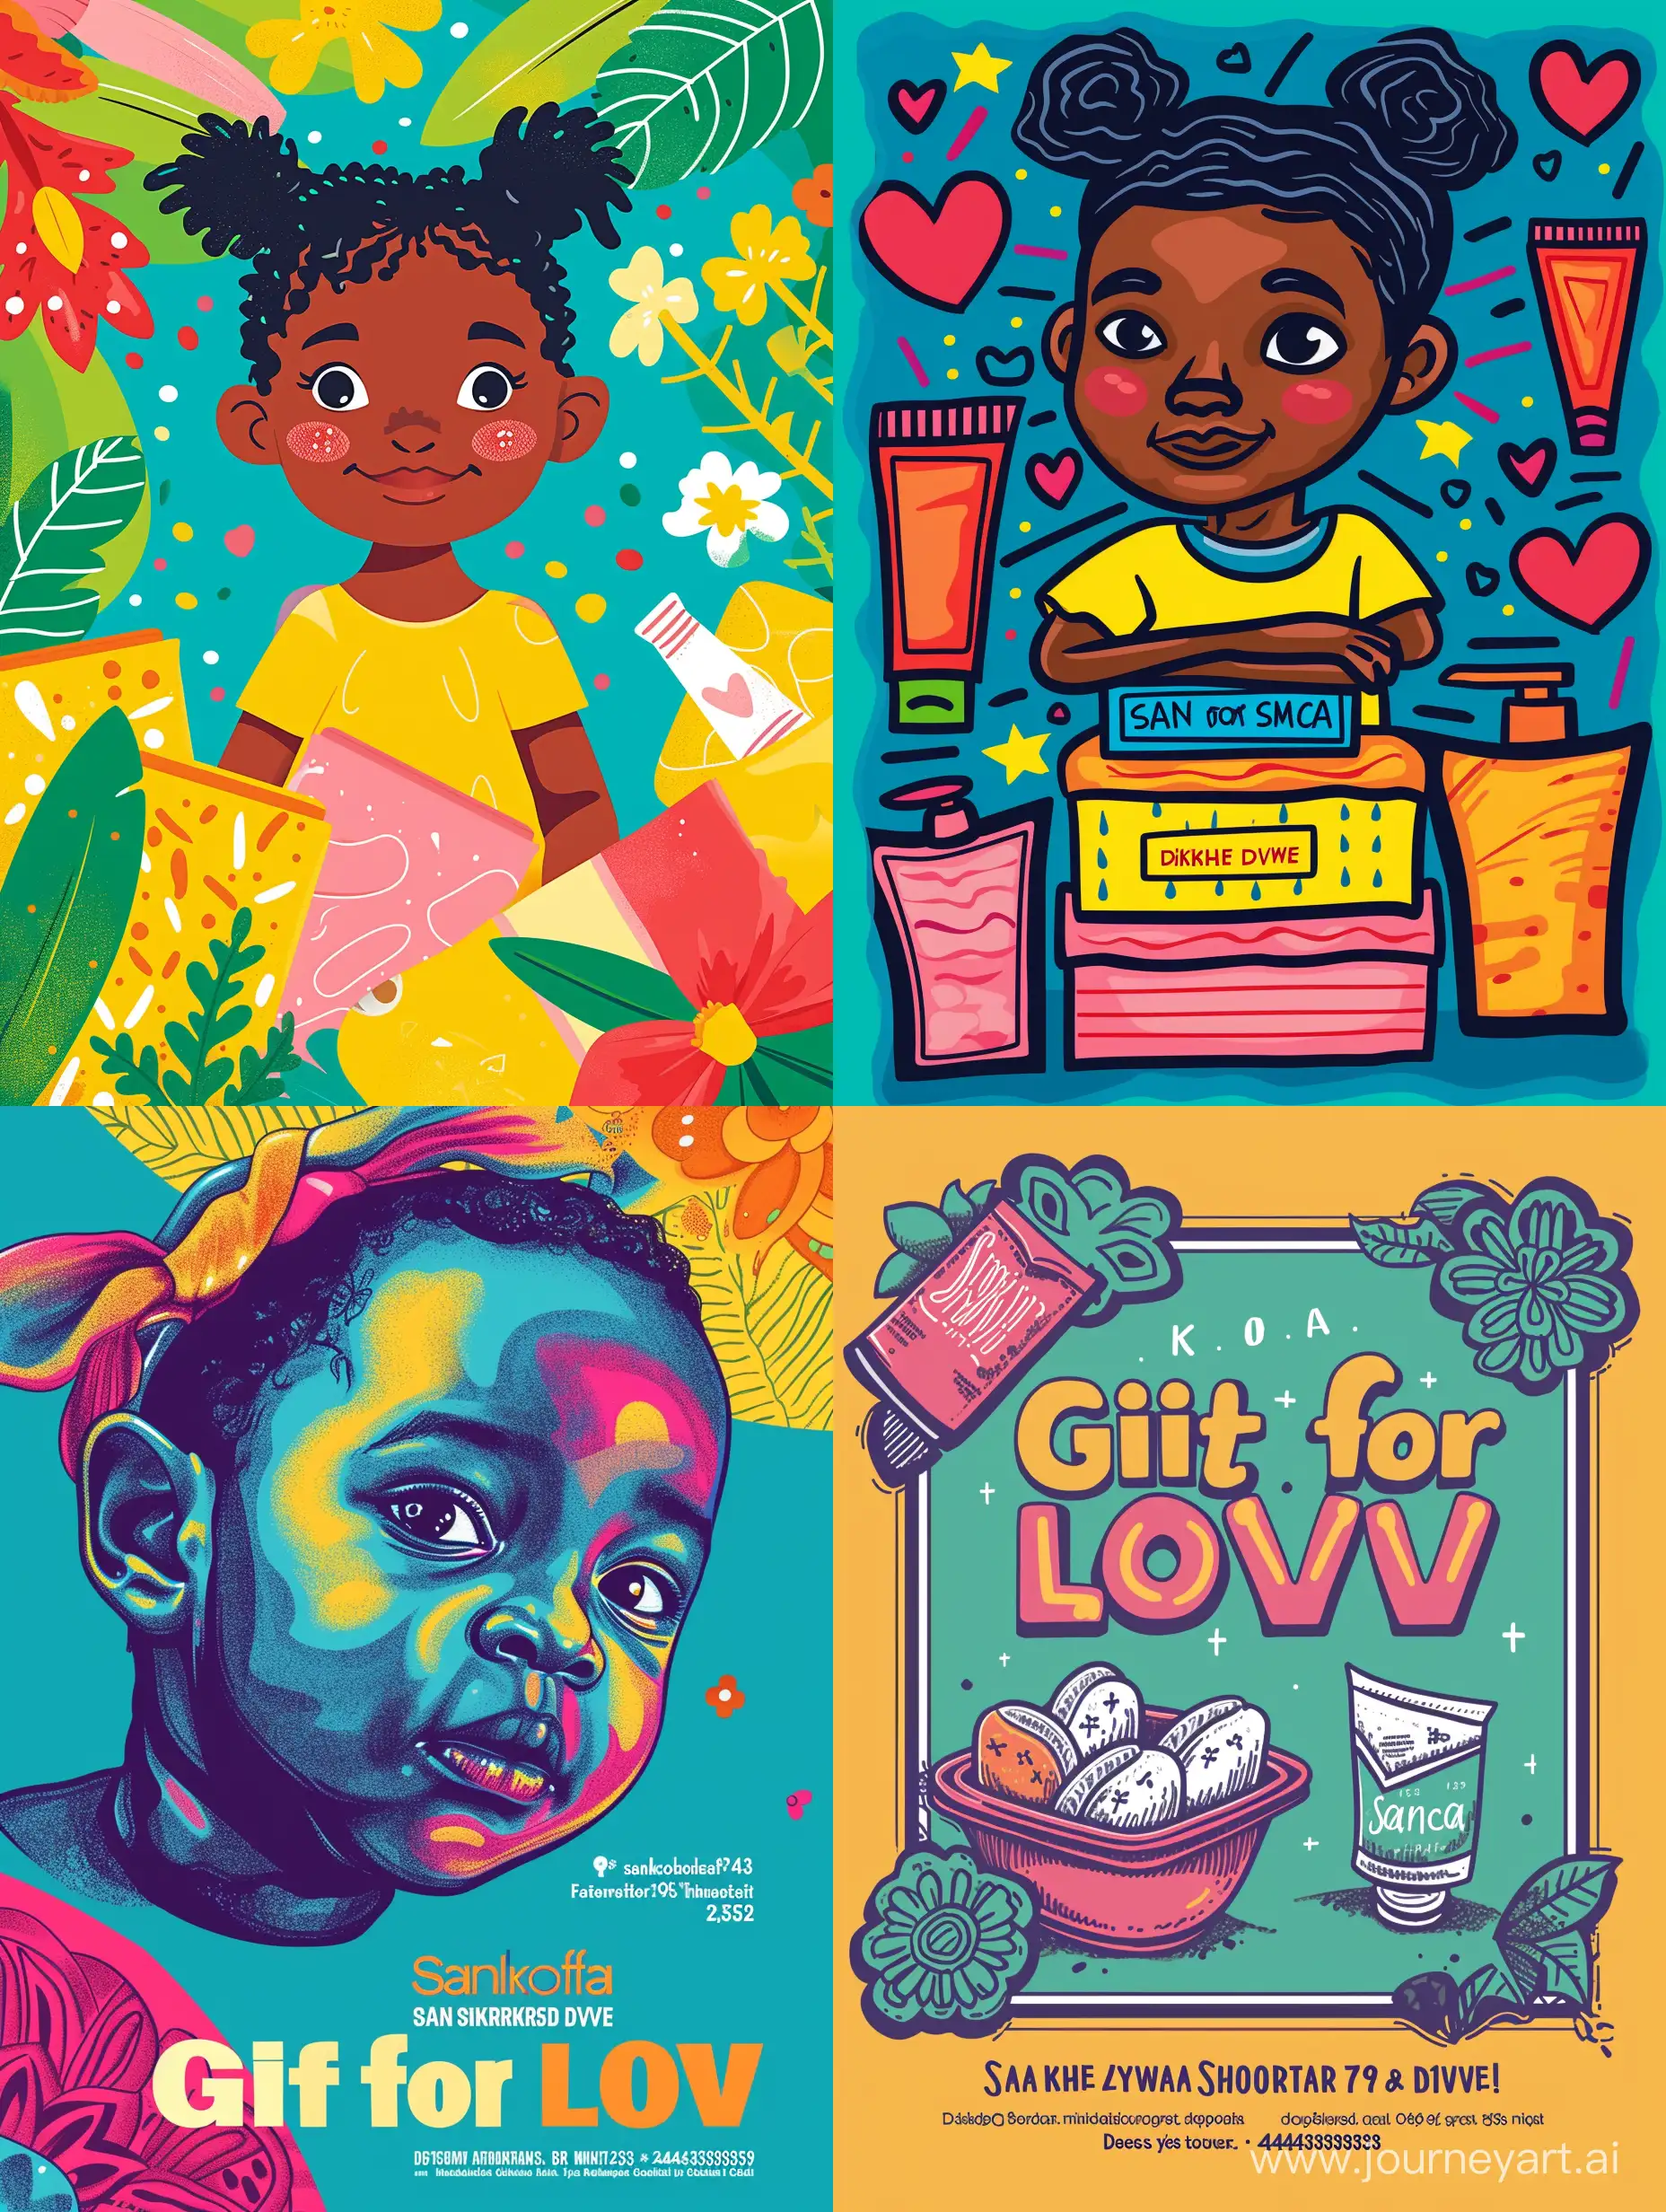 a colourful and vivid kiddies poster with the following information: **Title: Gift for Love - Toiletries Drive**  Sankofa Spheres, in collaboration with Yakhe Yande, presents a Toiletries Drive for the young ones.  **Gift the Following:** - Pads - Toothbrush/Toothpaste - Bar Soap (any) - Deodorant - Disposable Wipes - Face Cloth  **Donation Period:** 1st Feb - 25th Feb  **Drop-off Location:** 2335 Mphafa Street, Pimville *Or we can arrange pick-ups.*  **Contact:** Call 0843439359 for more information.